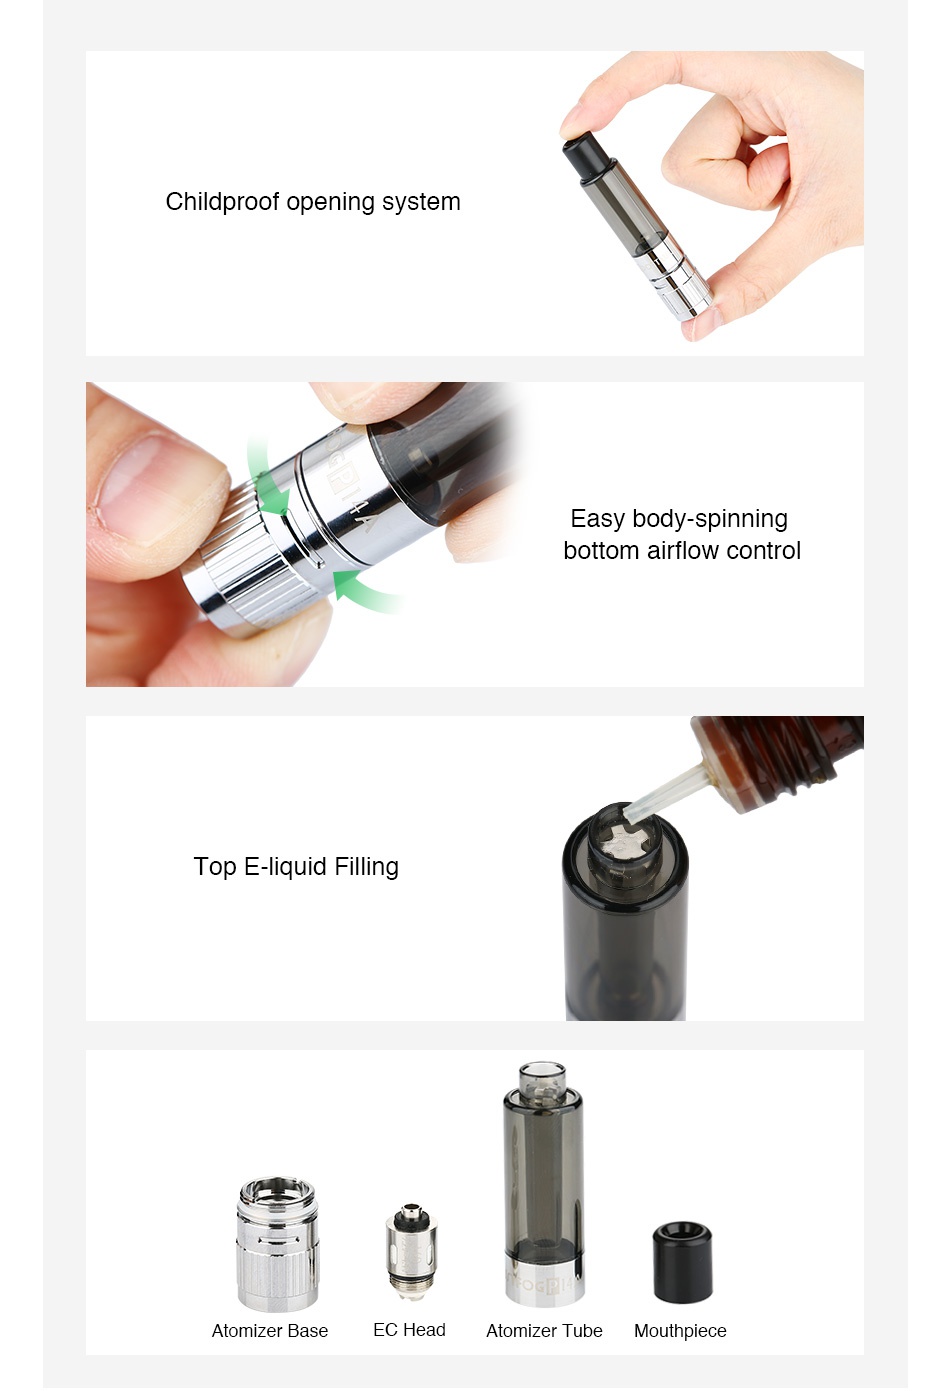 JUSTFOG P14A Clearomizer 1.9ml Childproof opening system Easy body spinning bottom airflow control Top E liquid Filling Atomizer base EC Head Atomizer Tube Mouthpiece